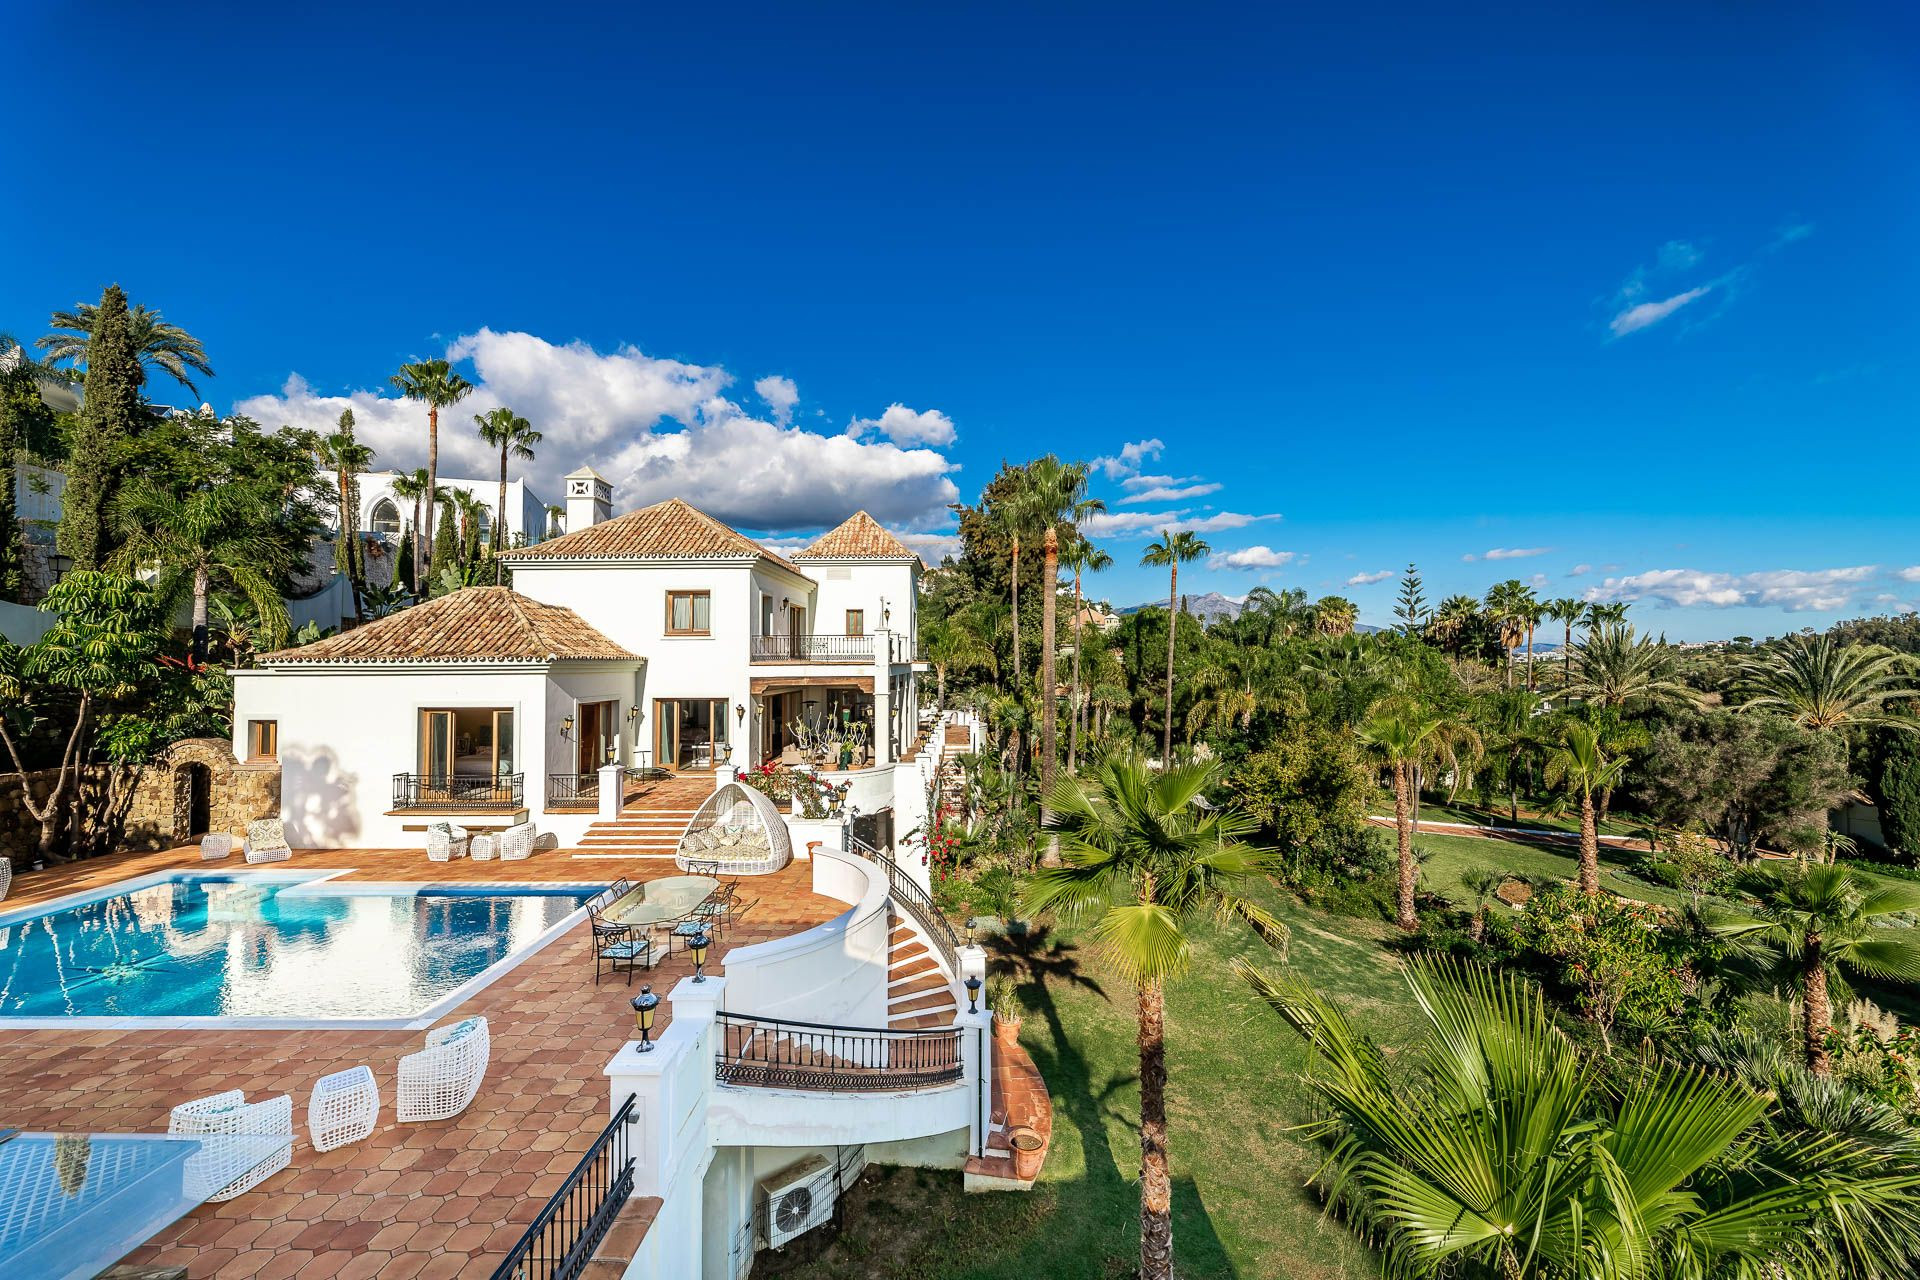 Luxury Mediterranean palace with 16 bedrooms located in the El Paraiso Alto area surrounded by the best golf courses in Costa del Sol